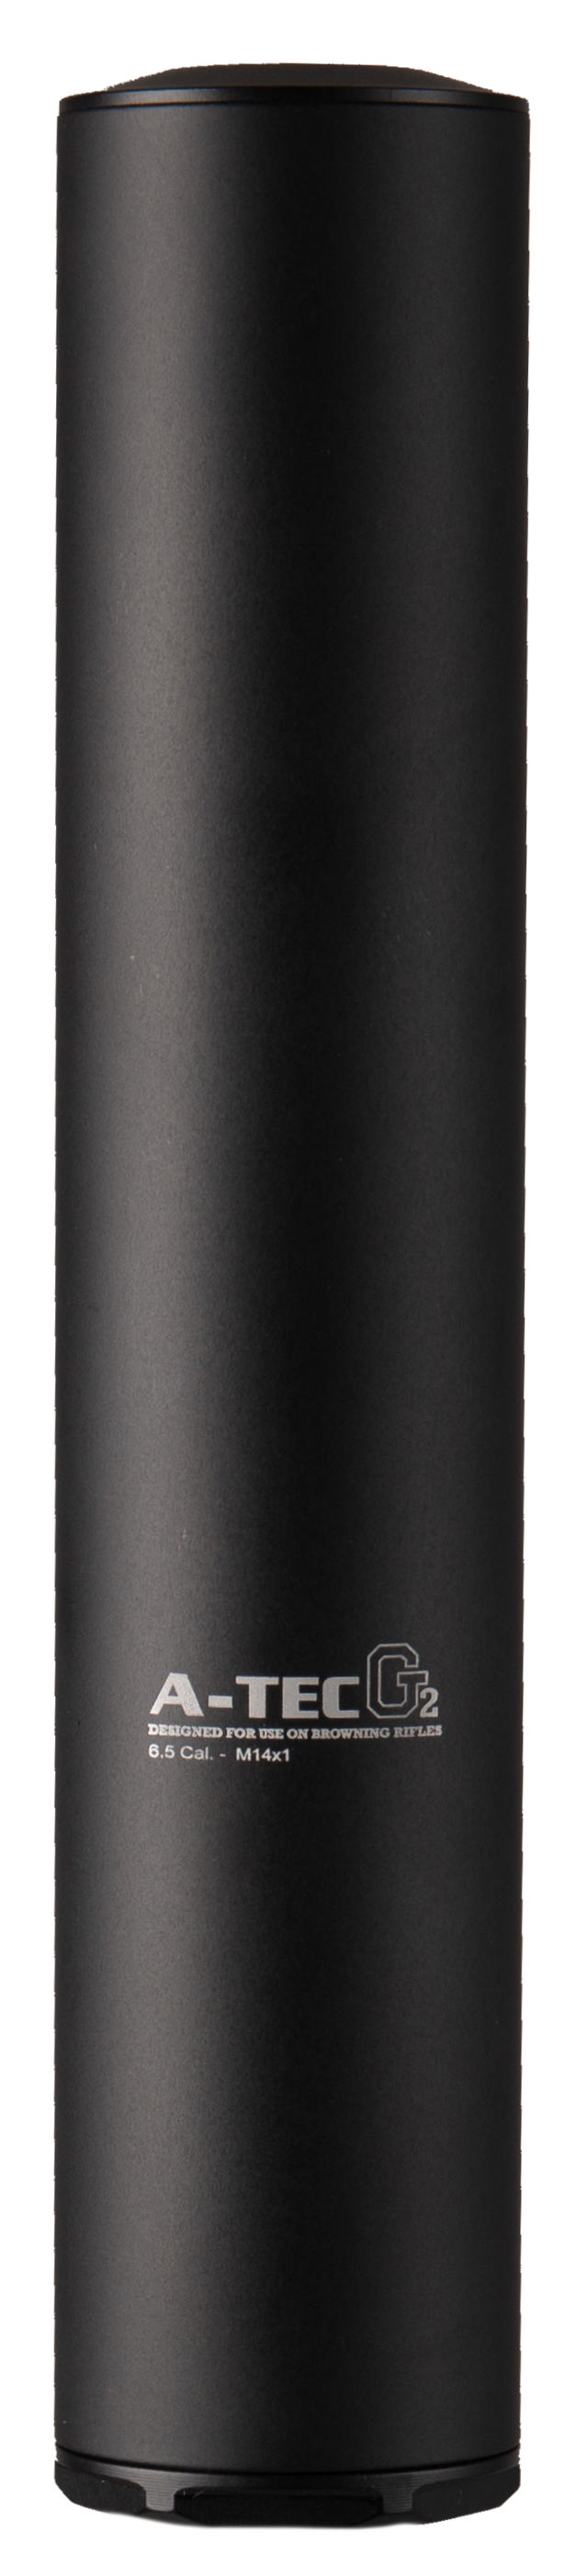 A-Tec G2 demper for Browning  270-30